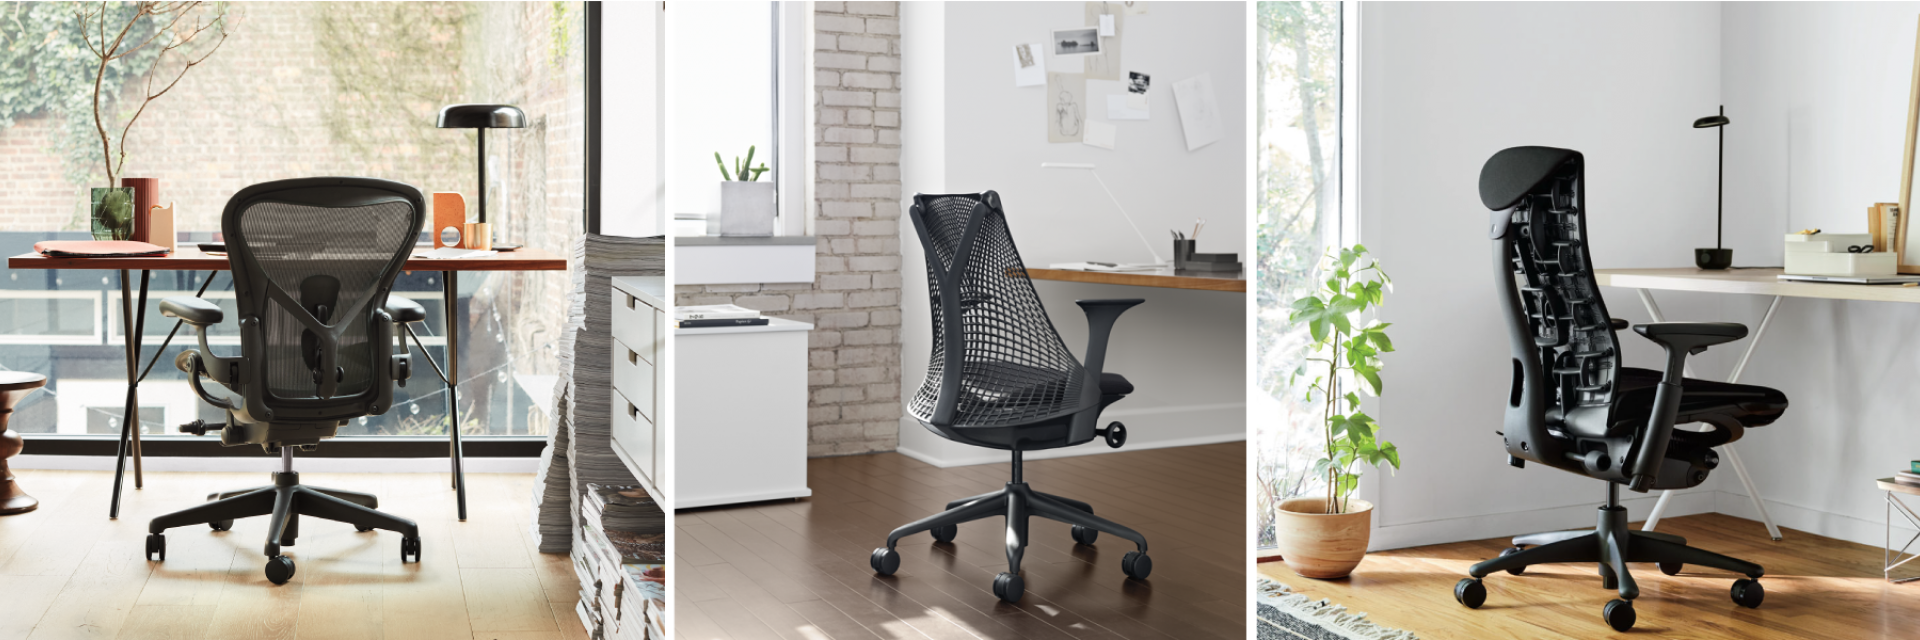 Performance Office Chairs from Herman Miller